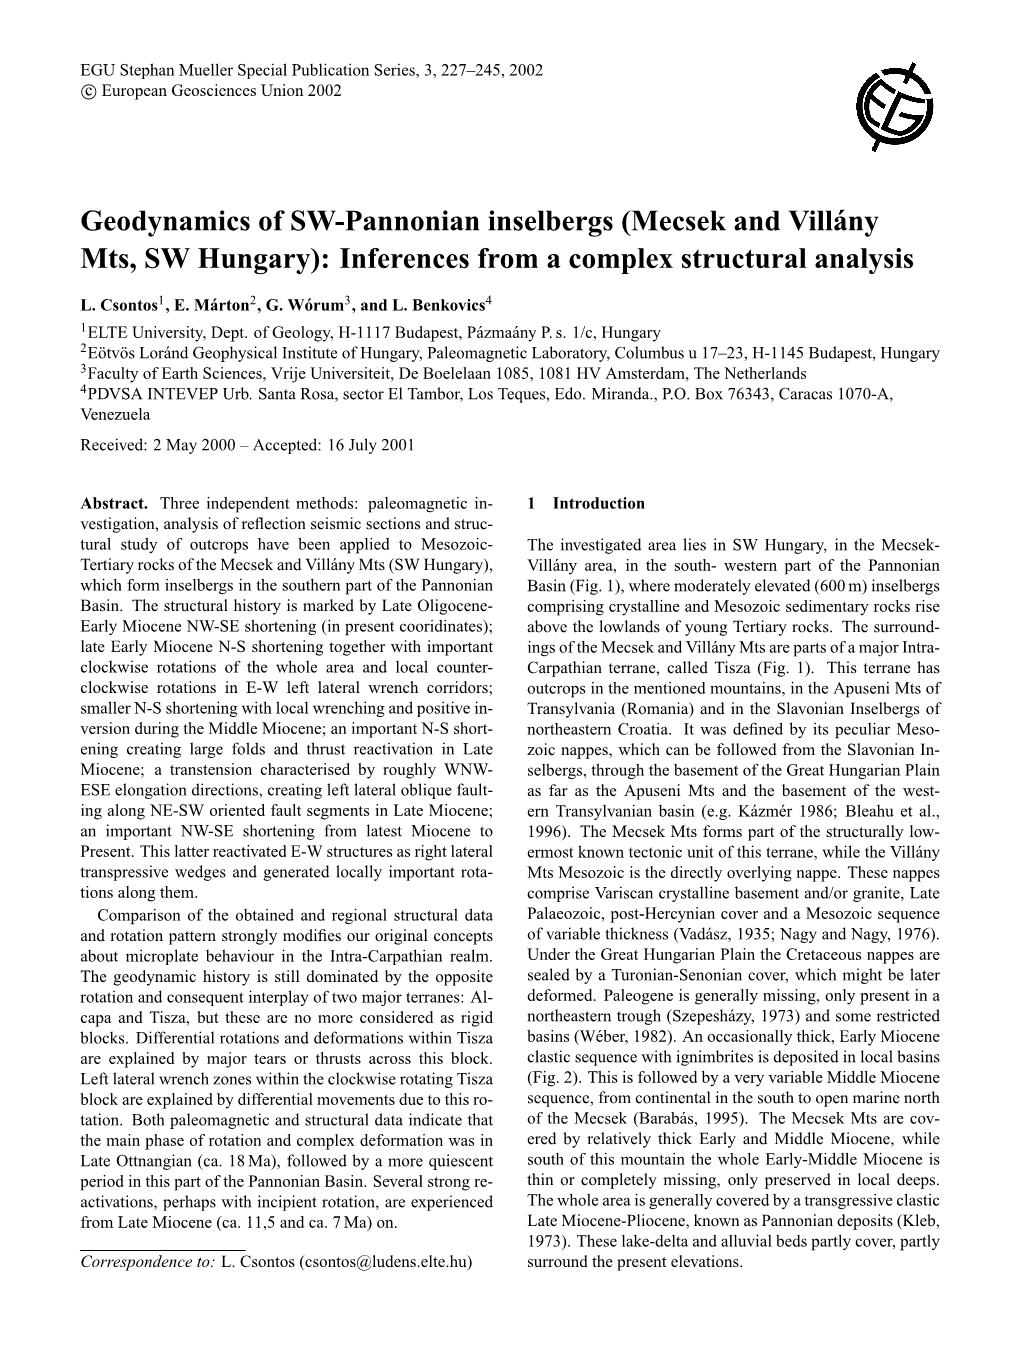 Geodynamics of SW-Pannonian Inselbergs (Mecsek and Vill´Any